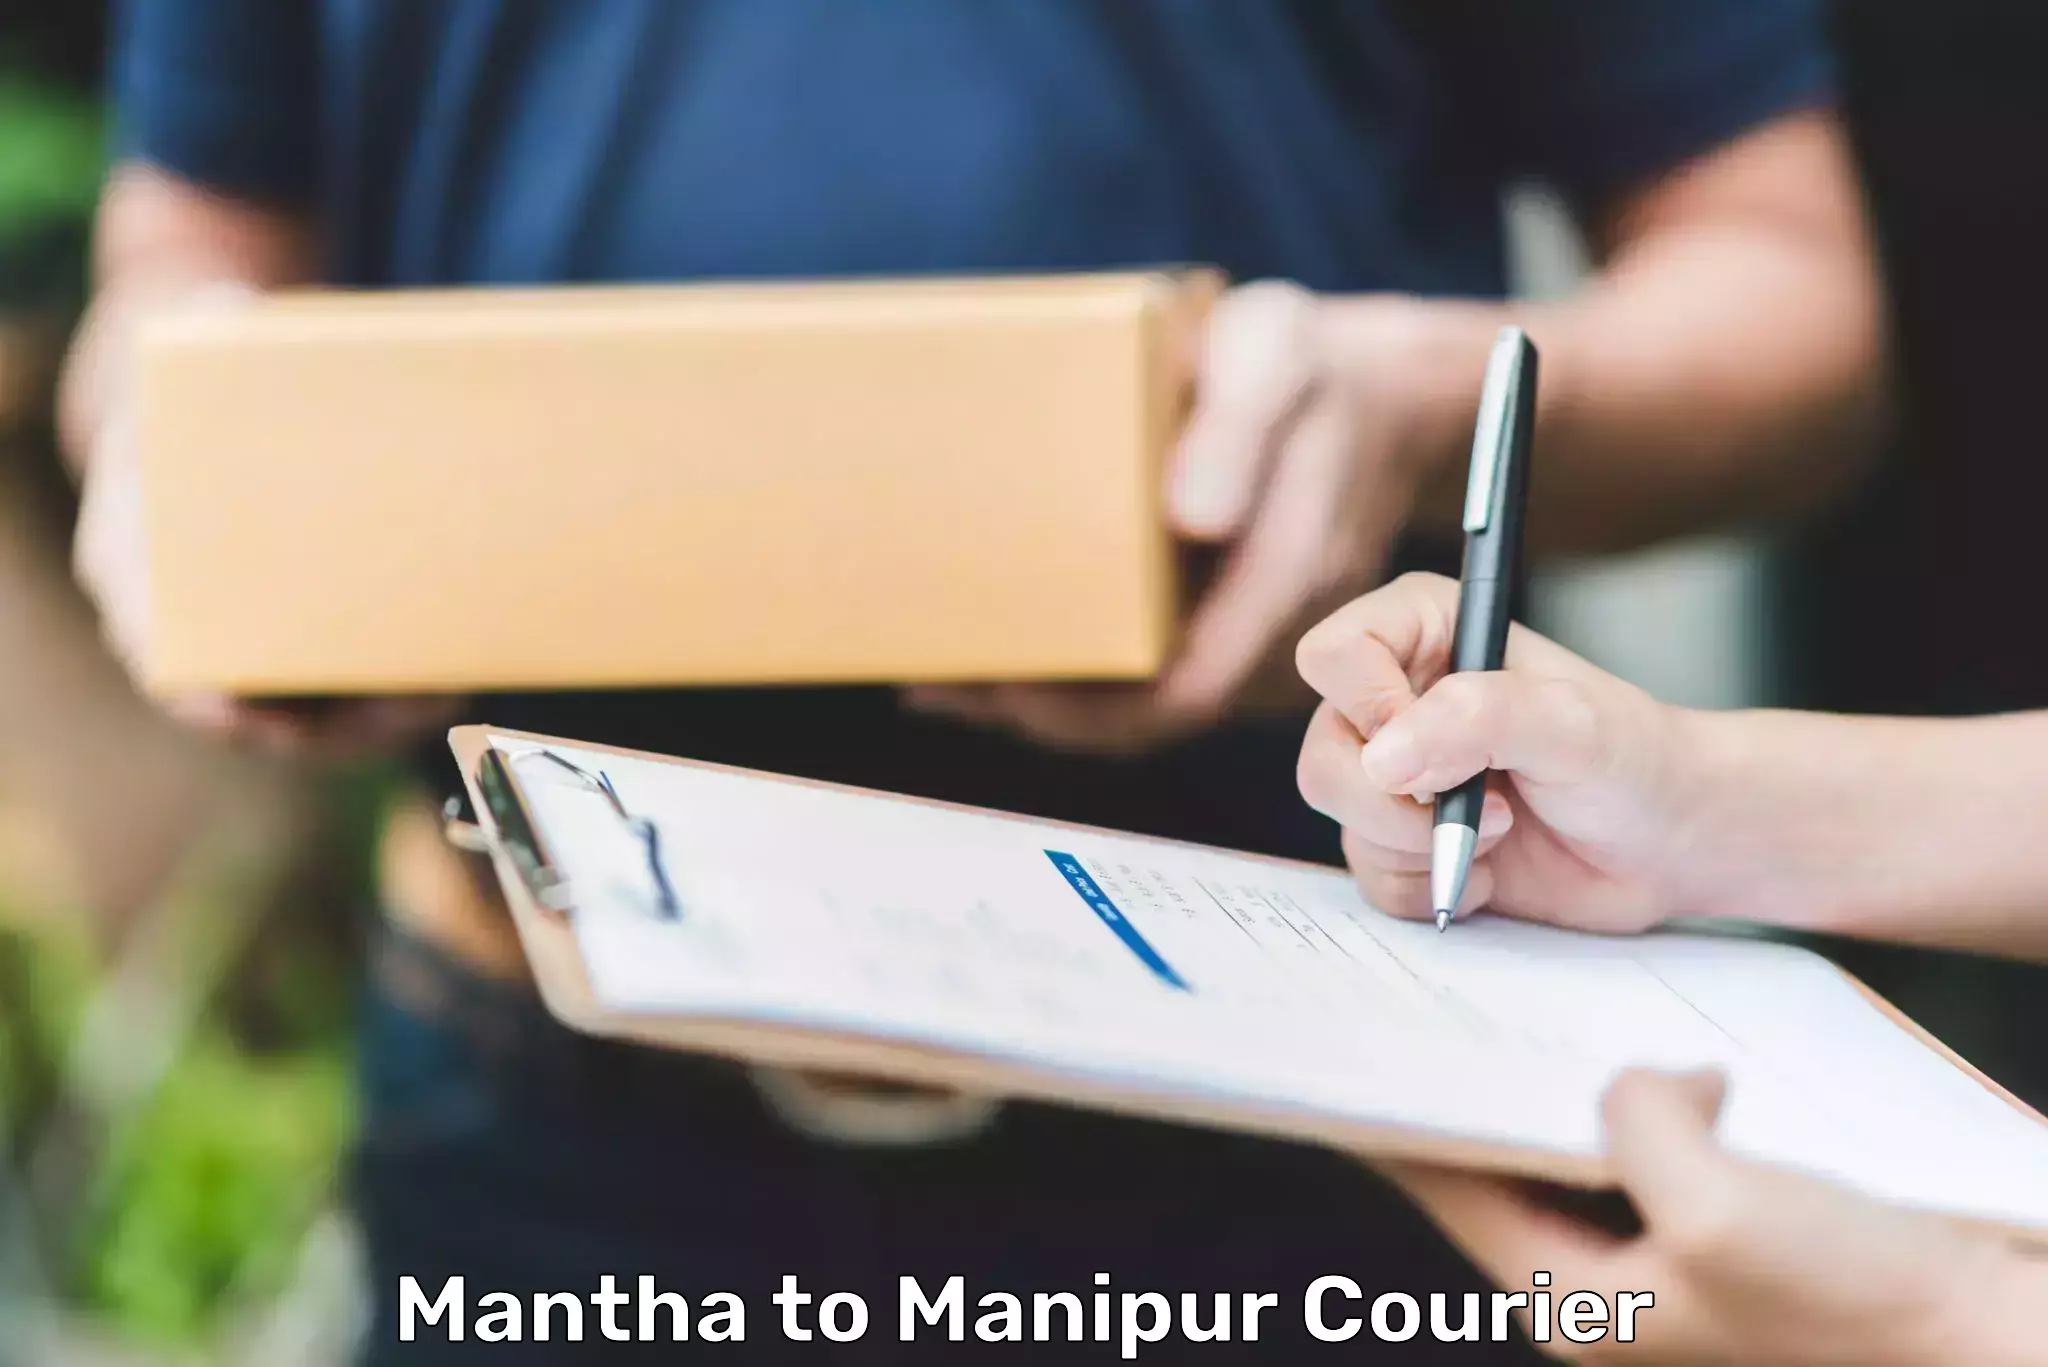 Delivery service partnership Mantha to Manipur